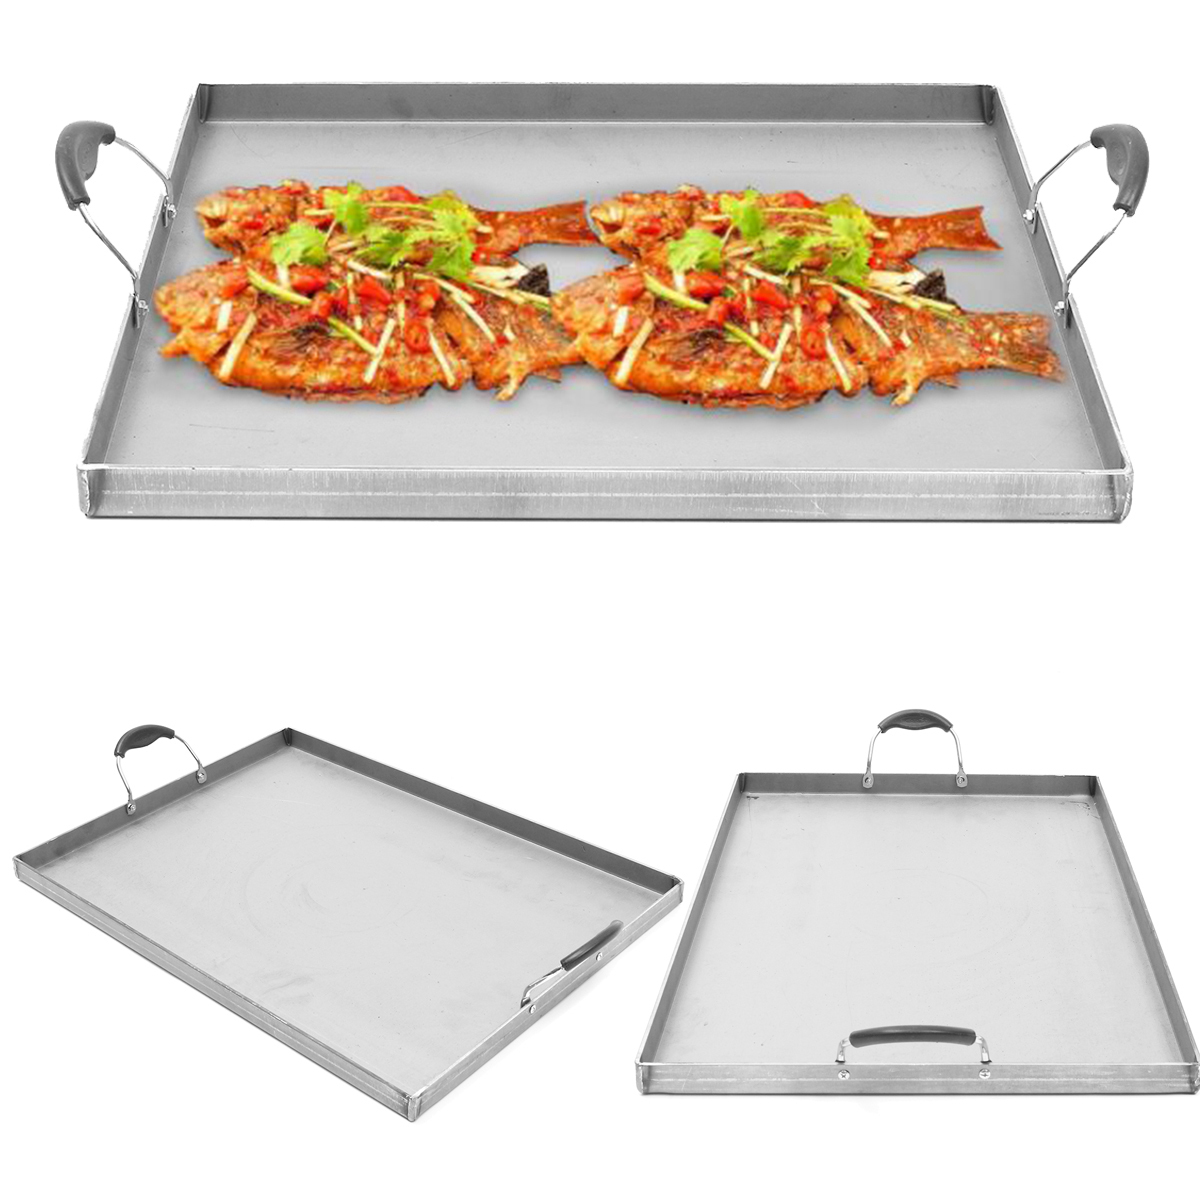 Stainless Steel Griddle Flat Top Cooking BBQ Grill Heat Distribution Stoves 1